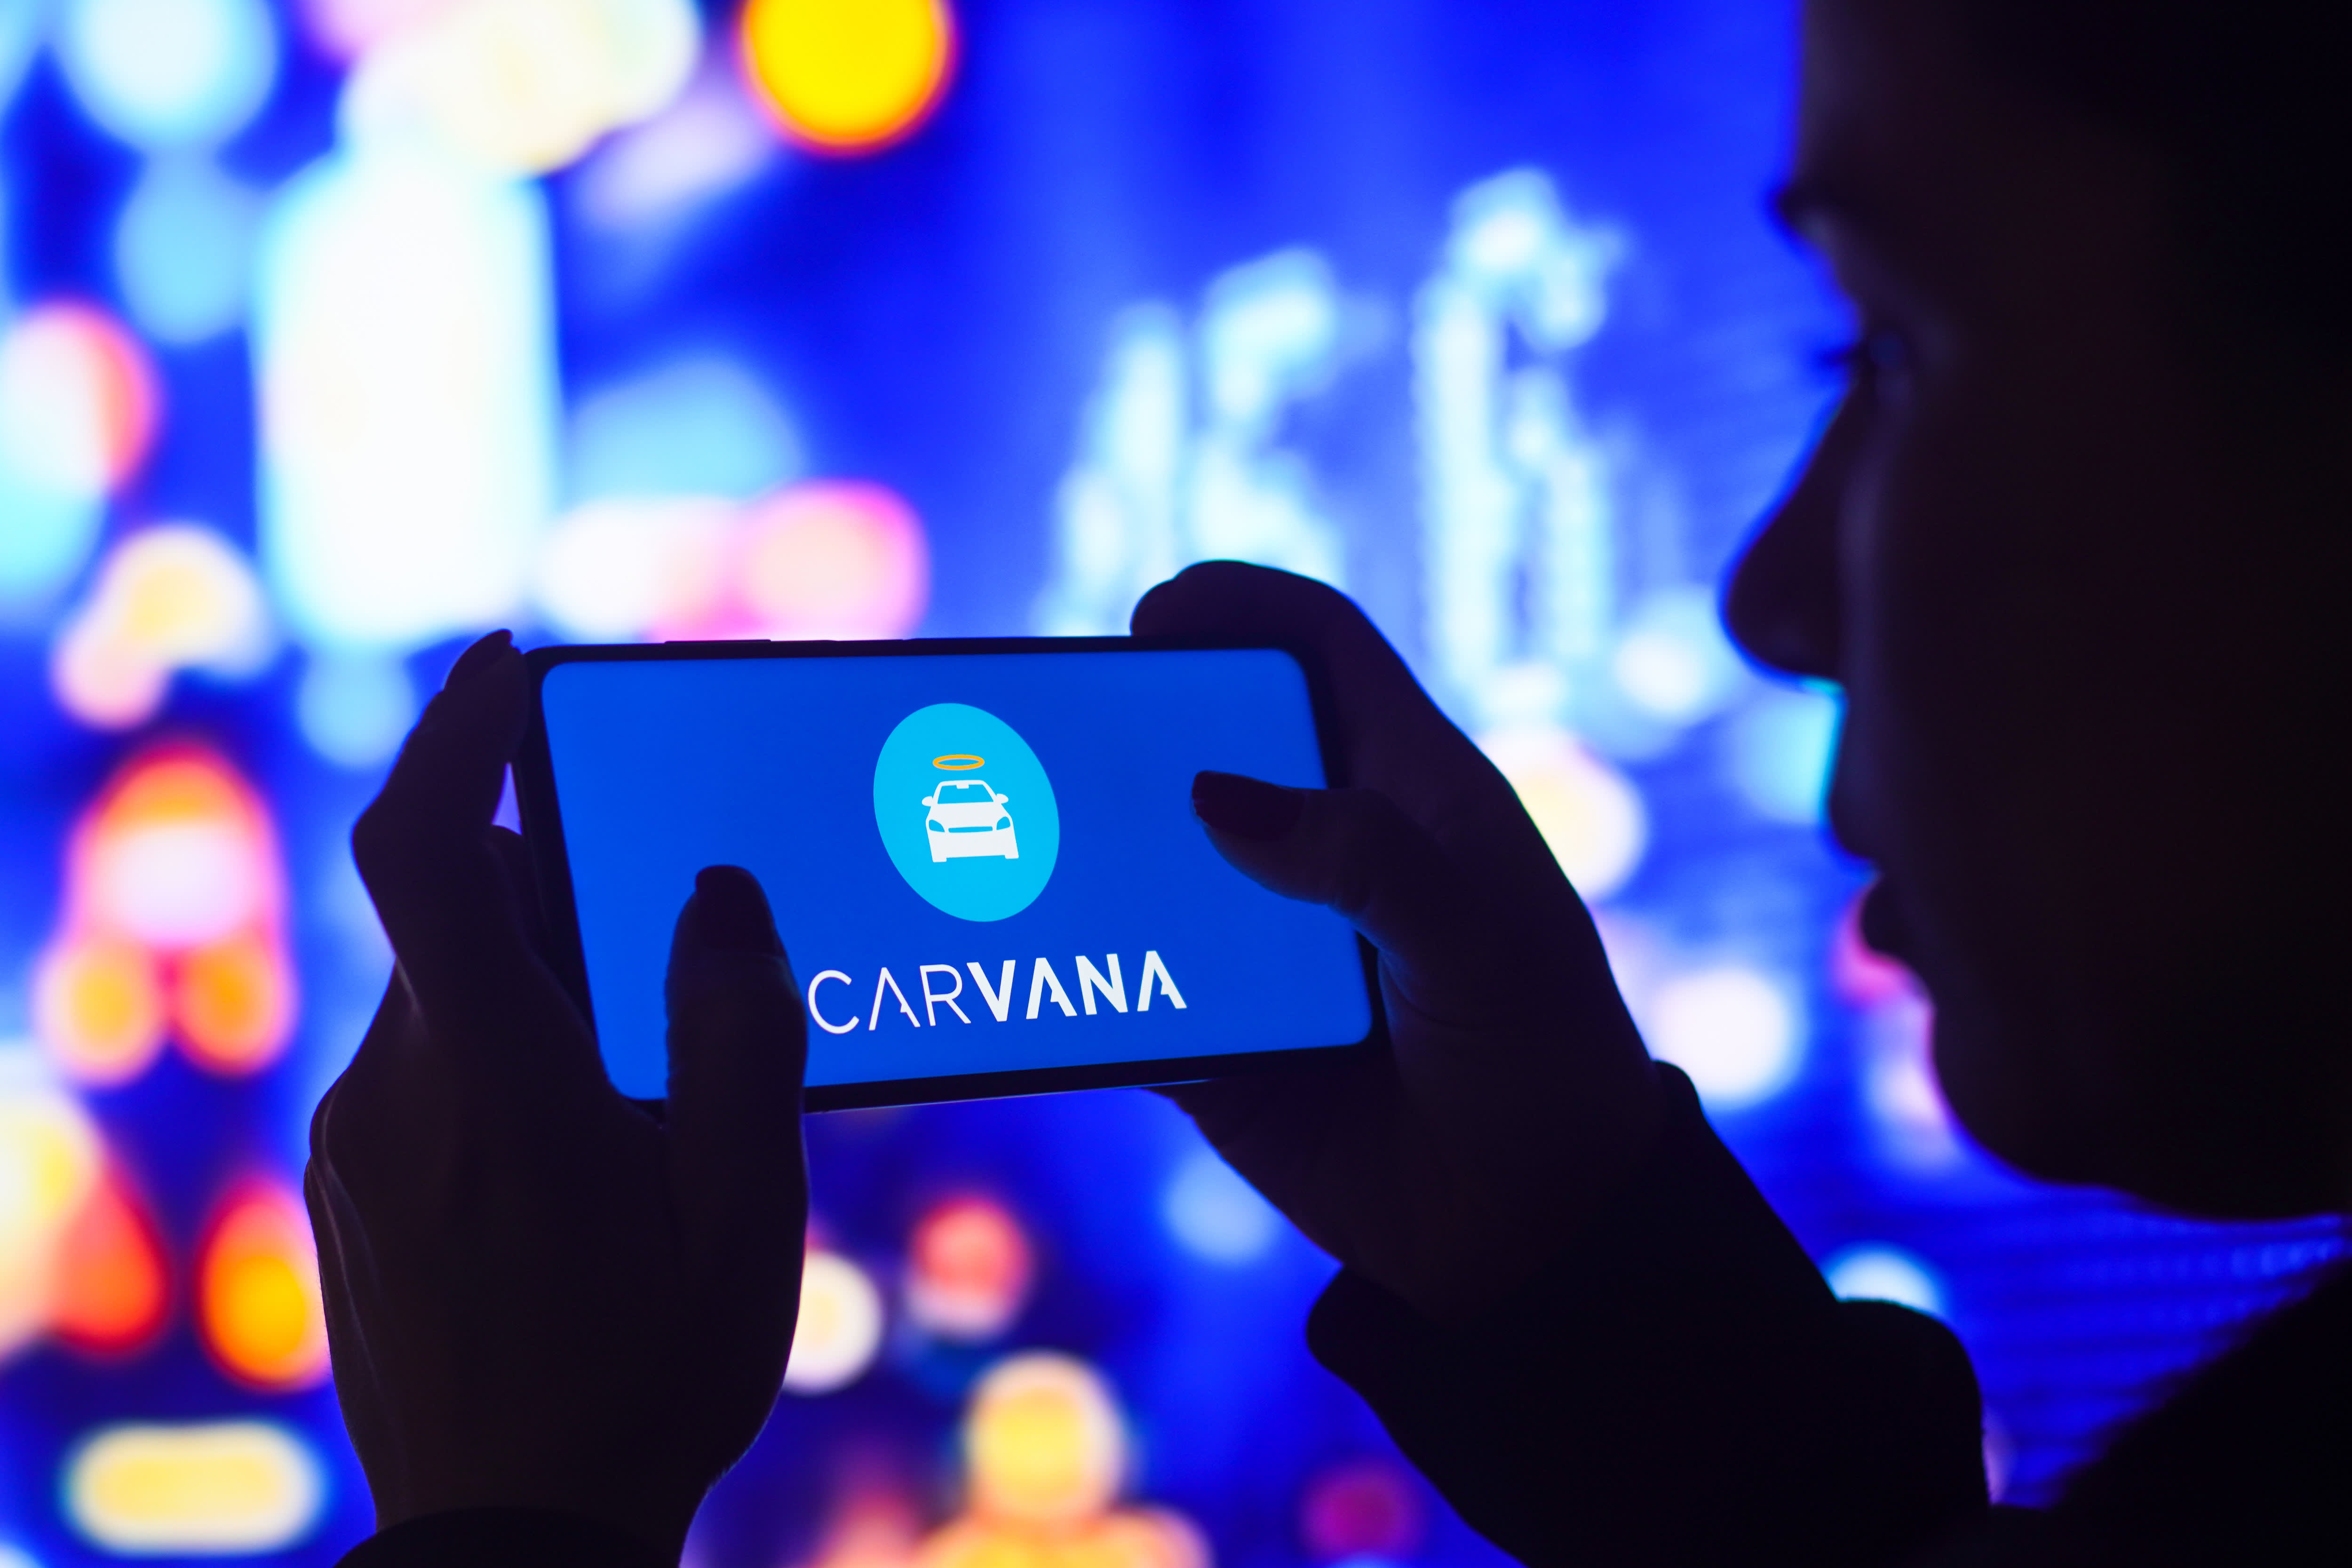 The most shorted stocks on Wall Street include Carvana and this brick-and-mortar retailer